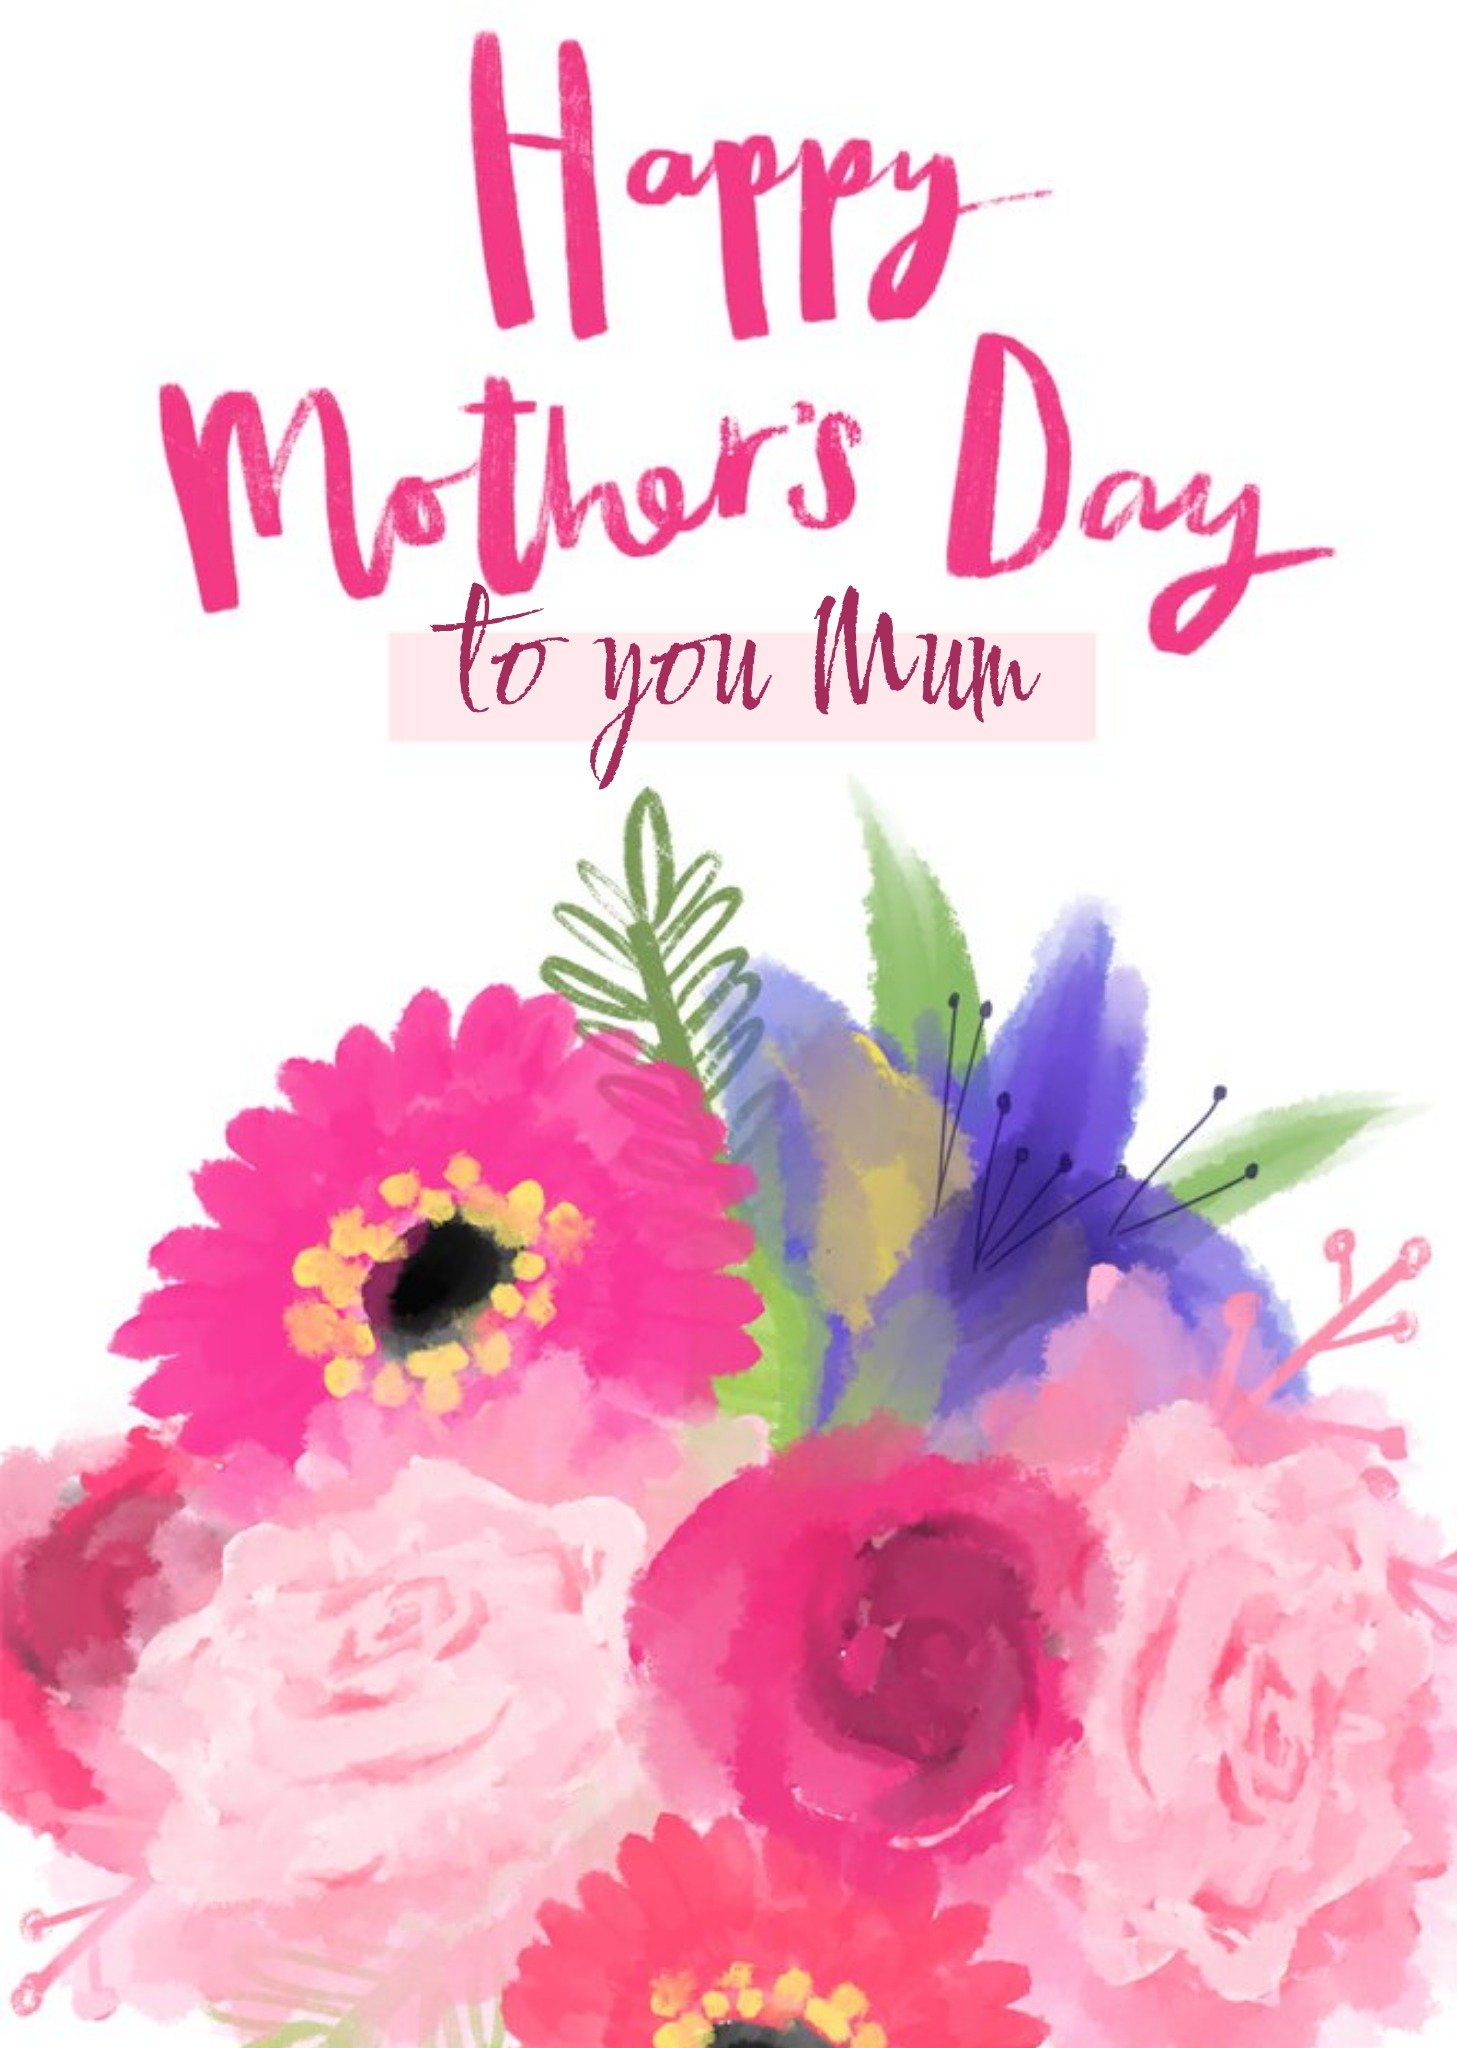 Moonpig Bright Pink Watercolour Flowers Happy Mother's Day Card, Large